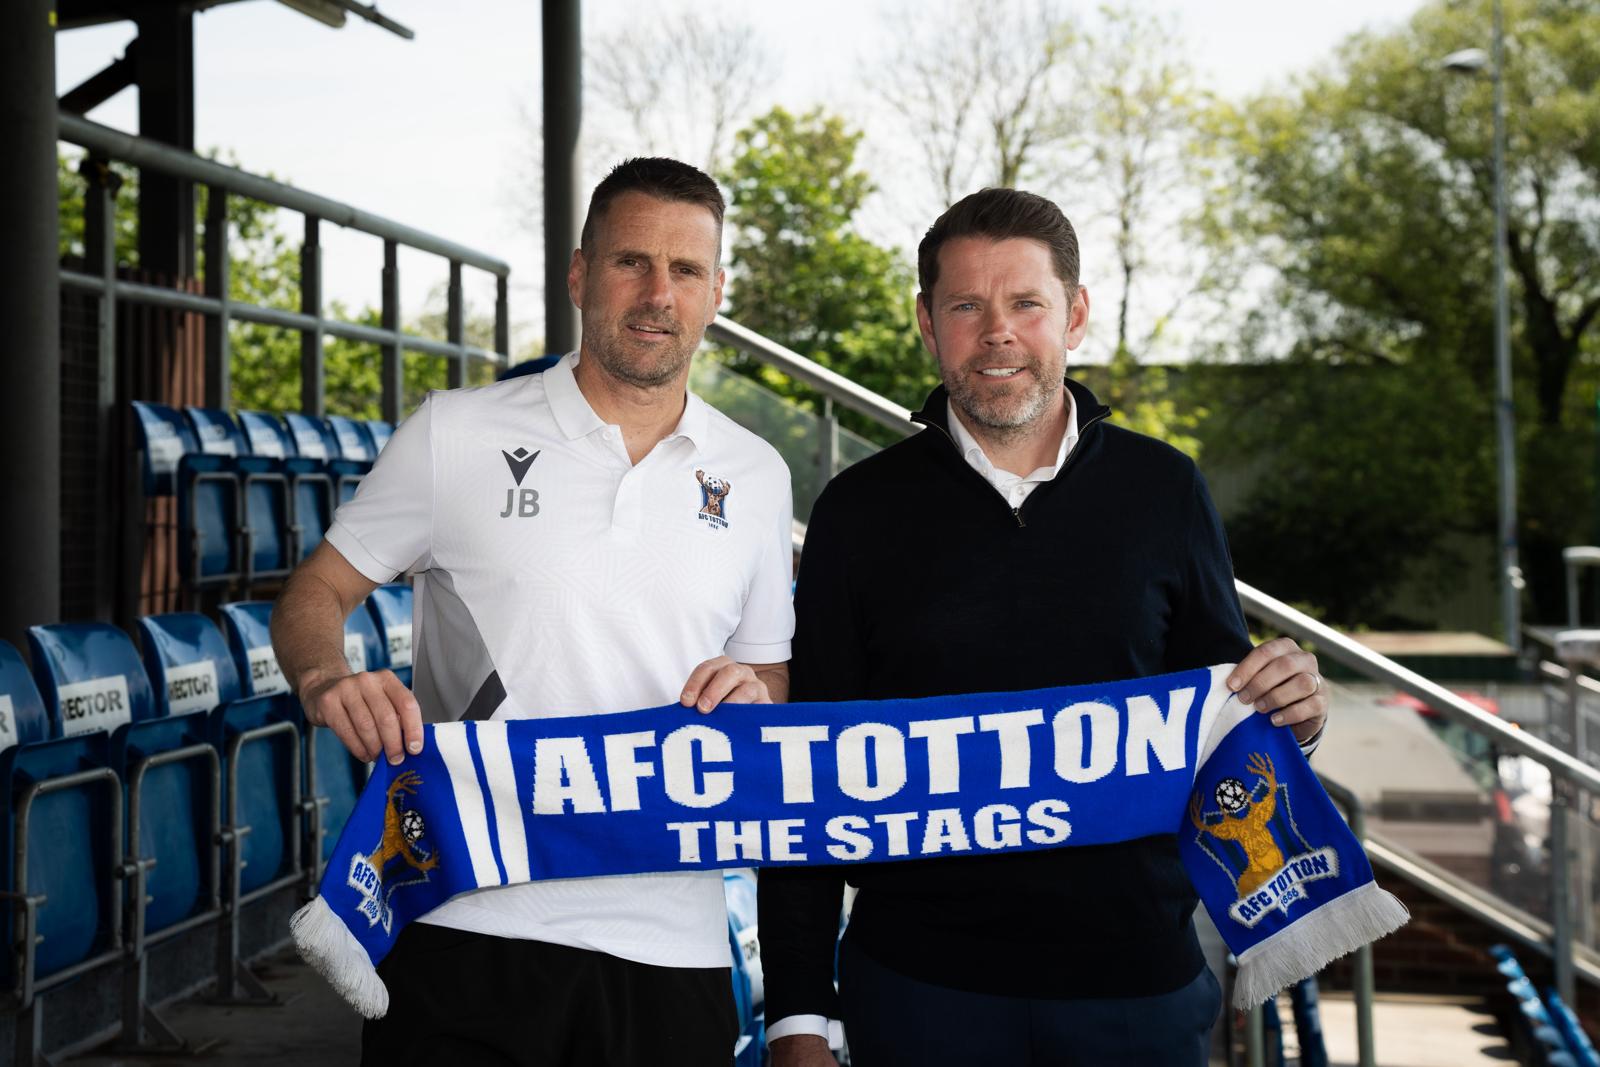 Southampton legend announced as AFC Totton's new director of football